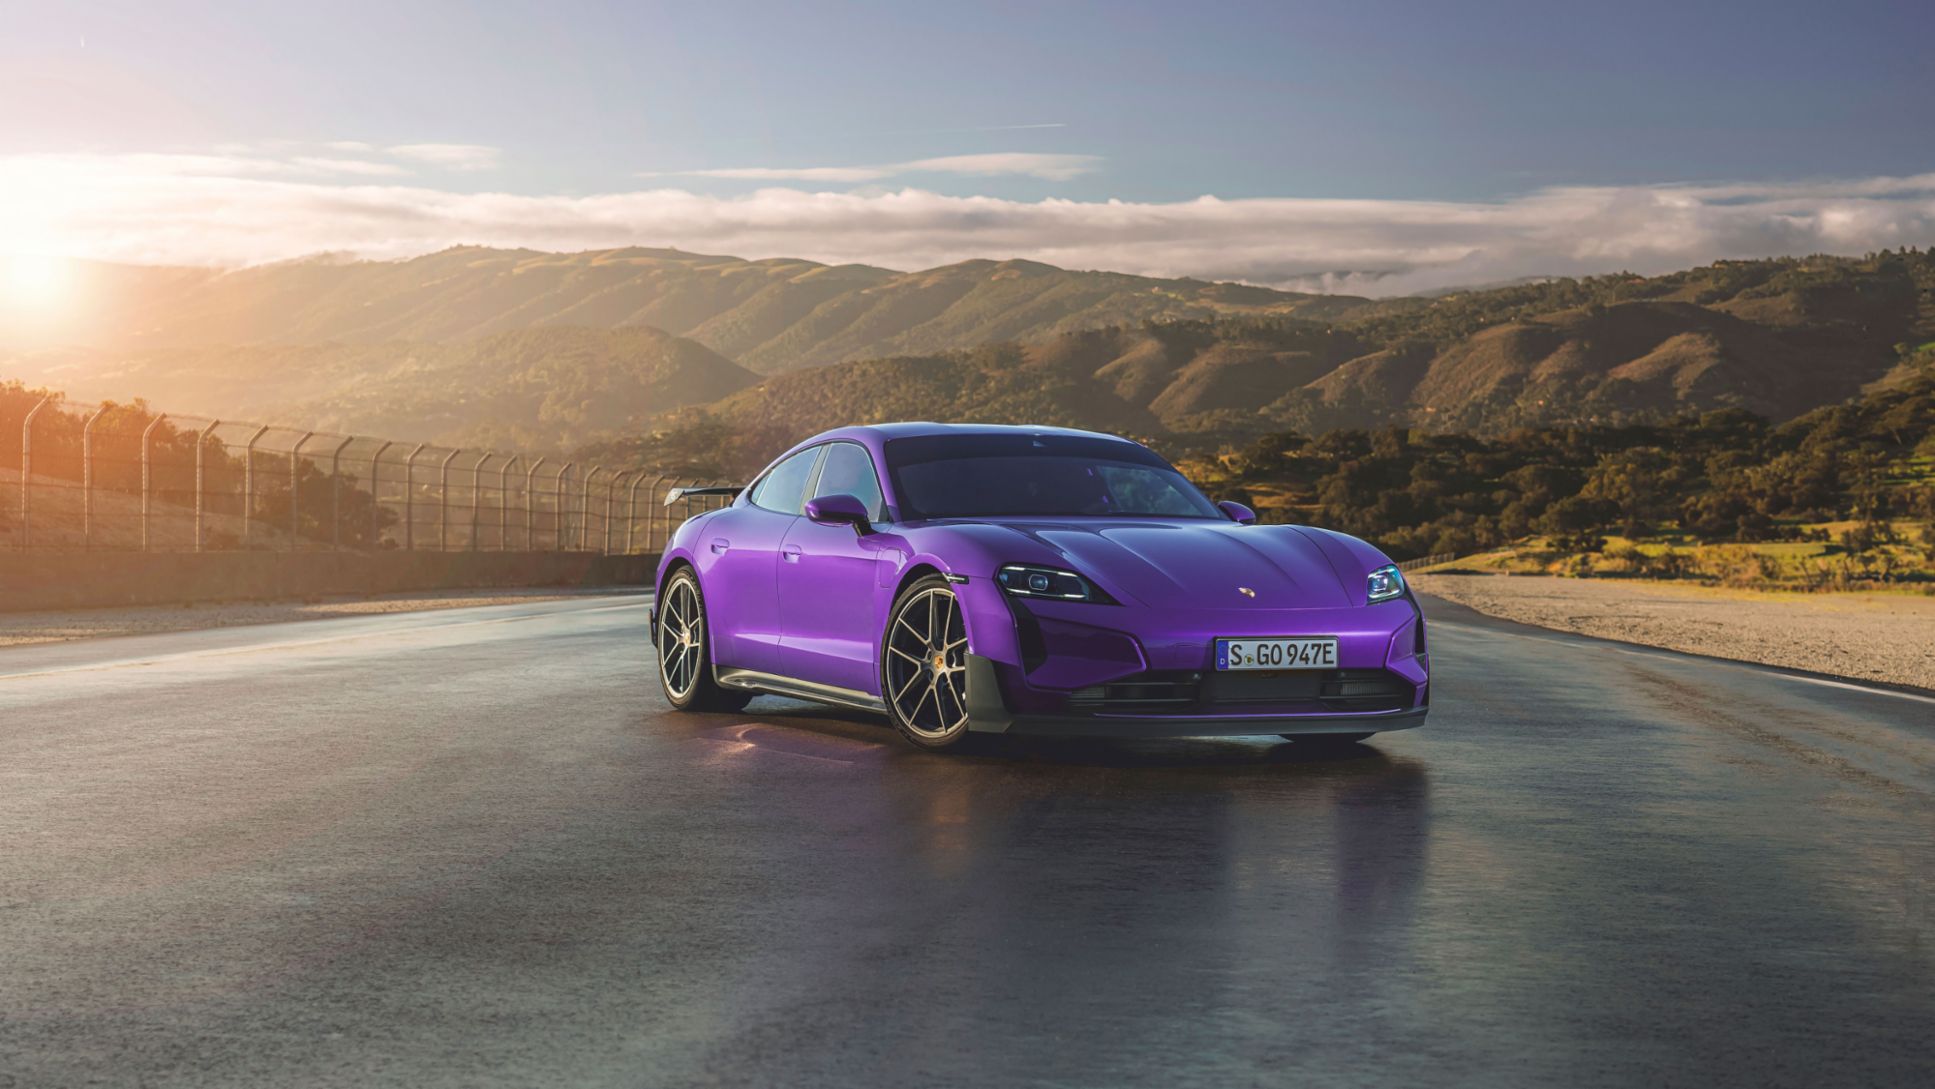 The Taycan Turbo GT reaches speeds over 180mph, and a 0-60 speed of just over 2 seconds./Porsche 